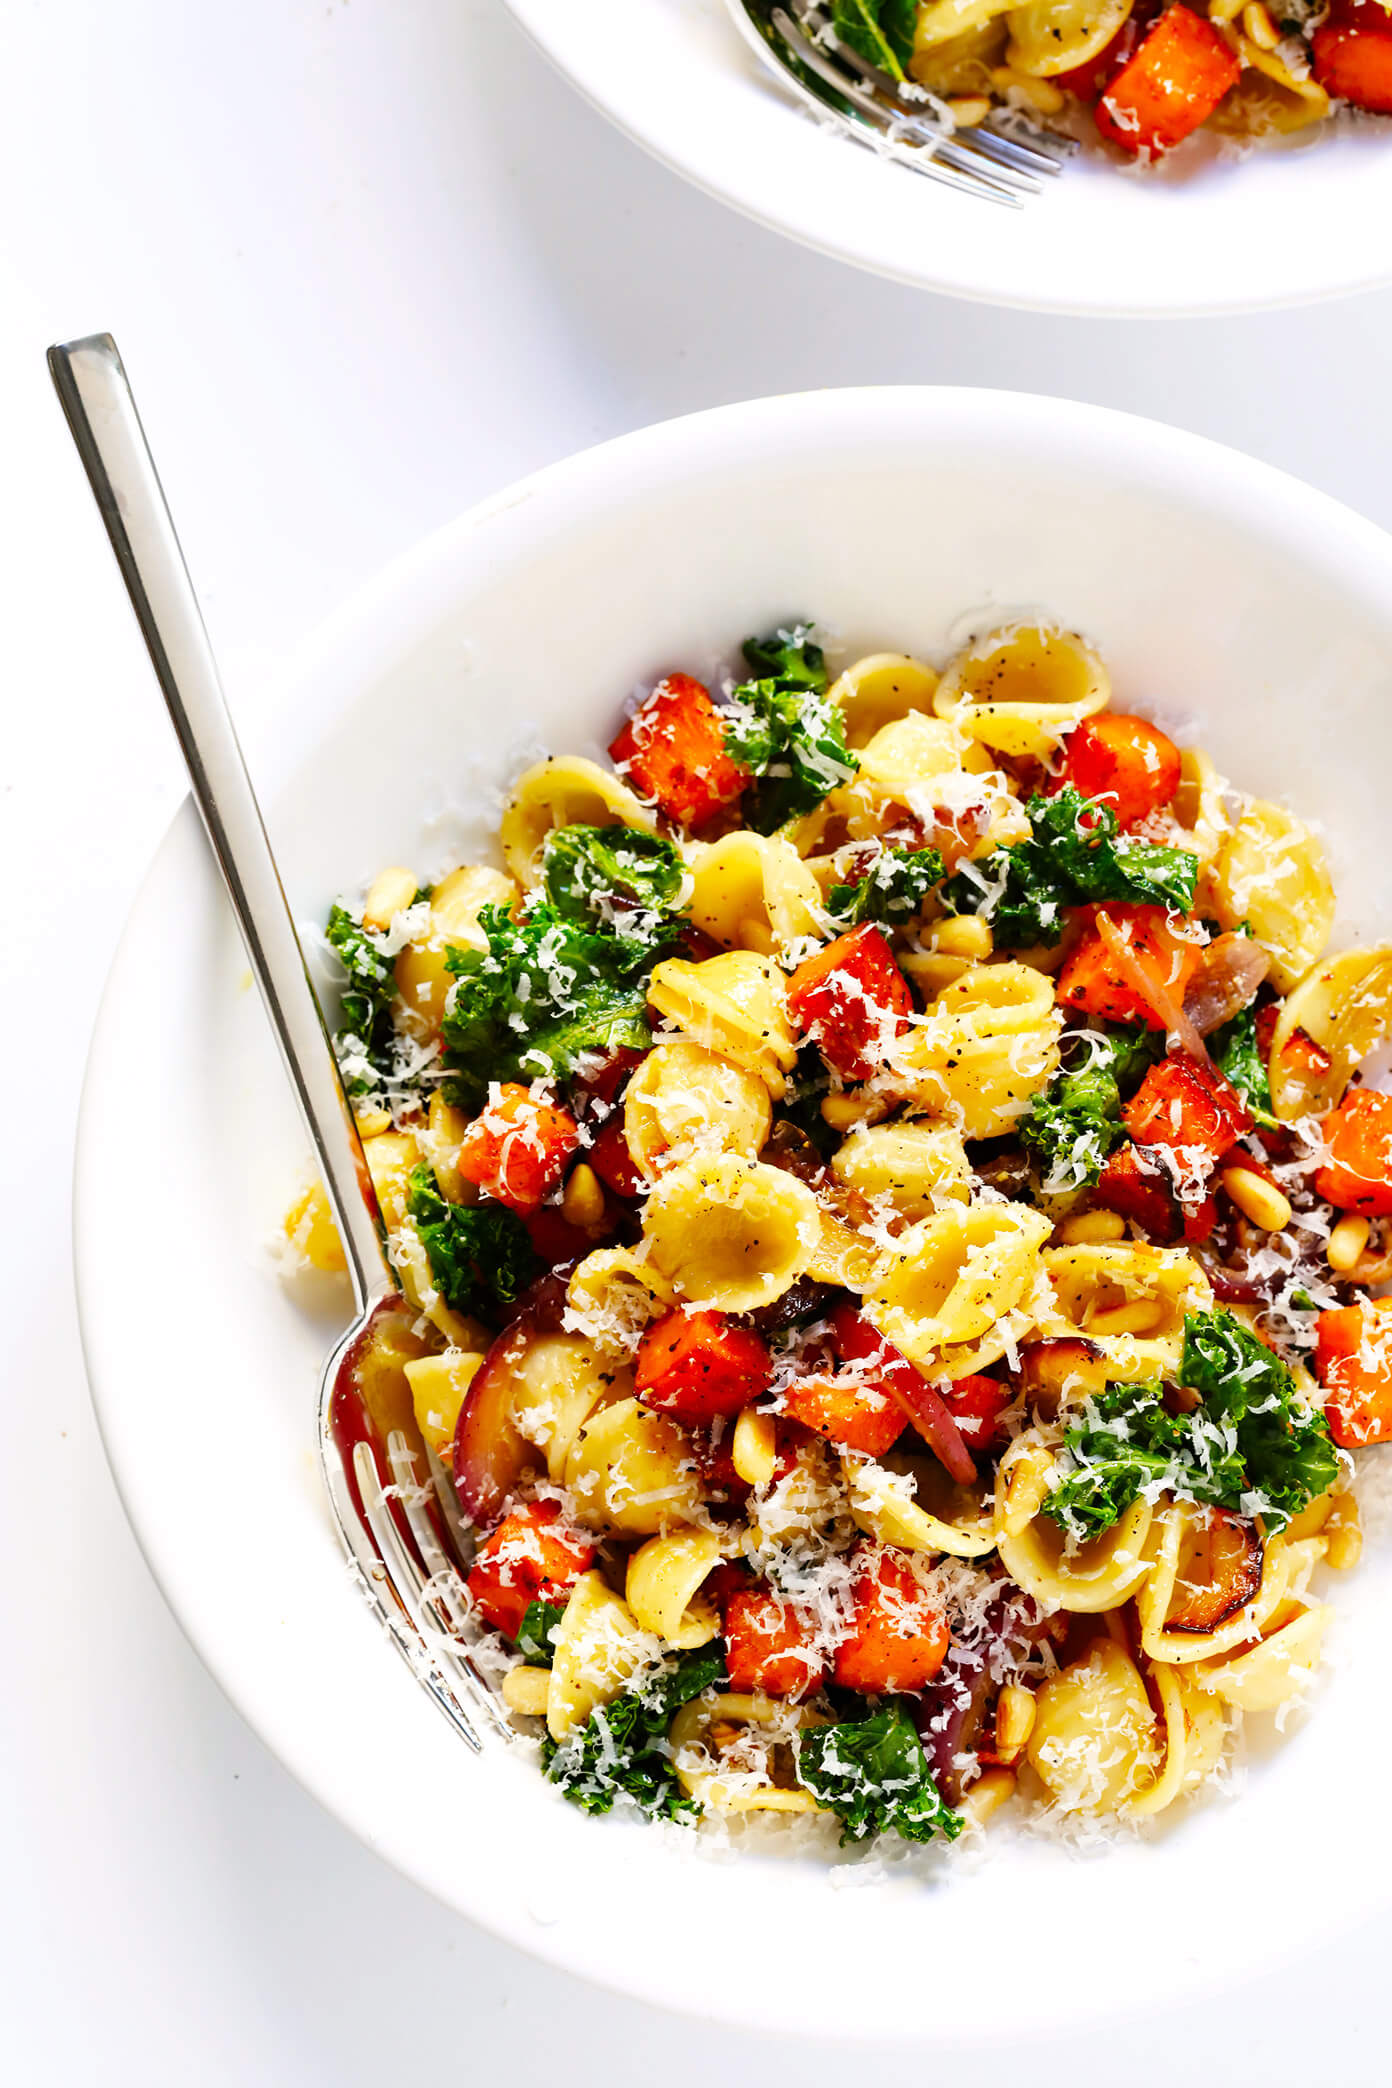 Pasta with Caramelized Sweet Potatoes, Kale and Parmesan